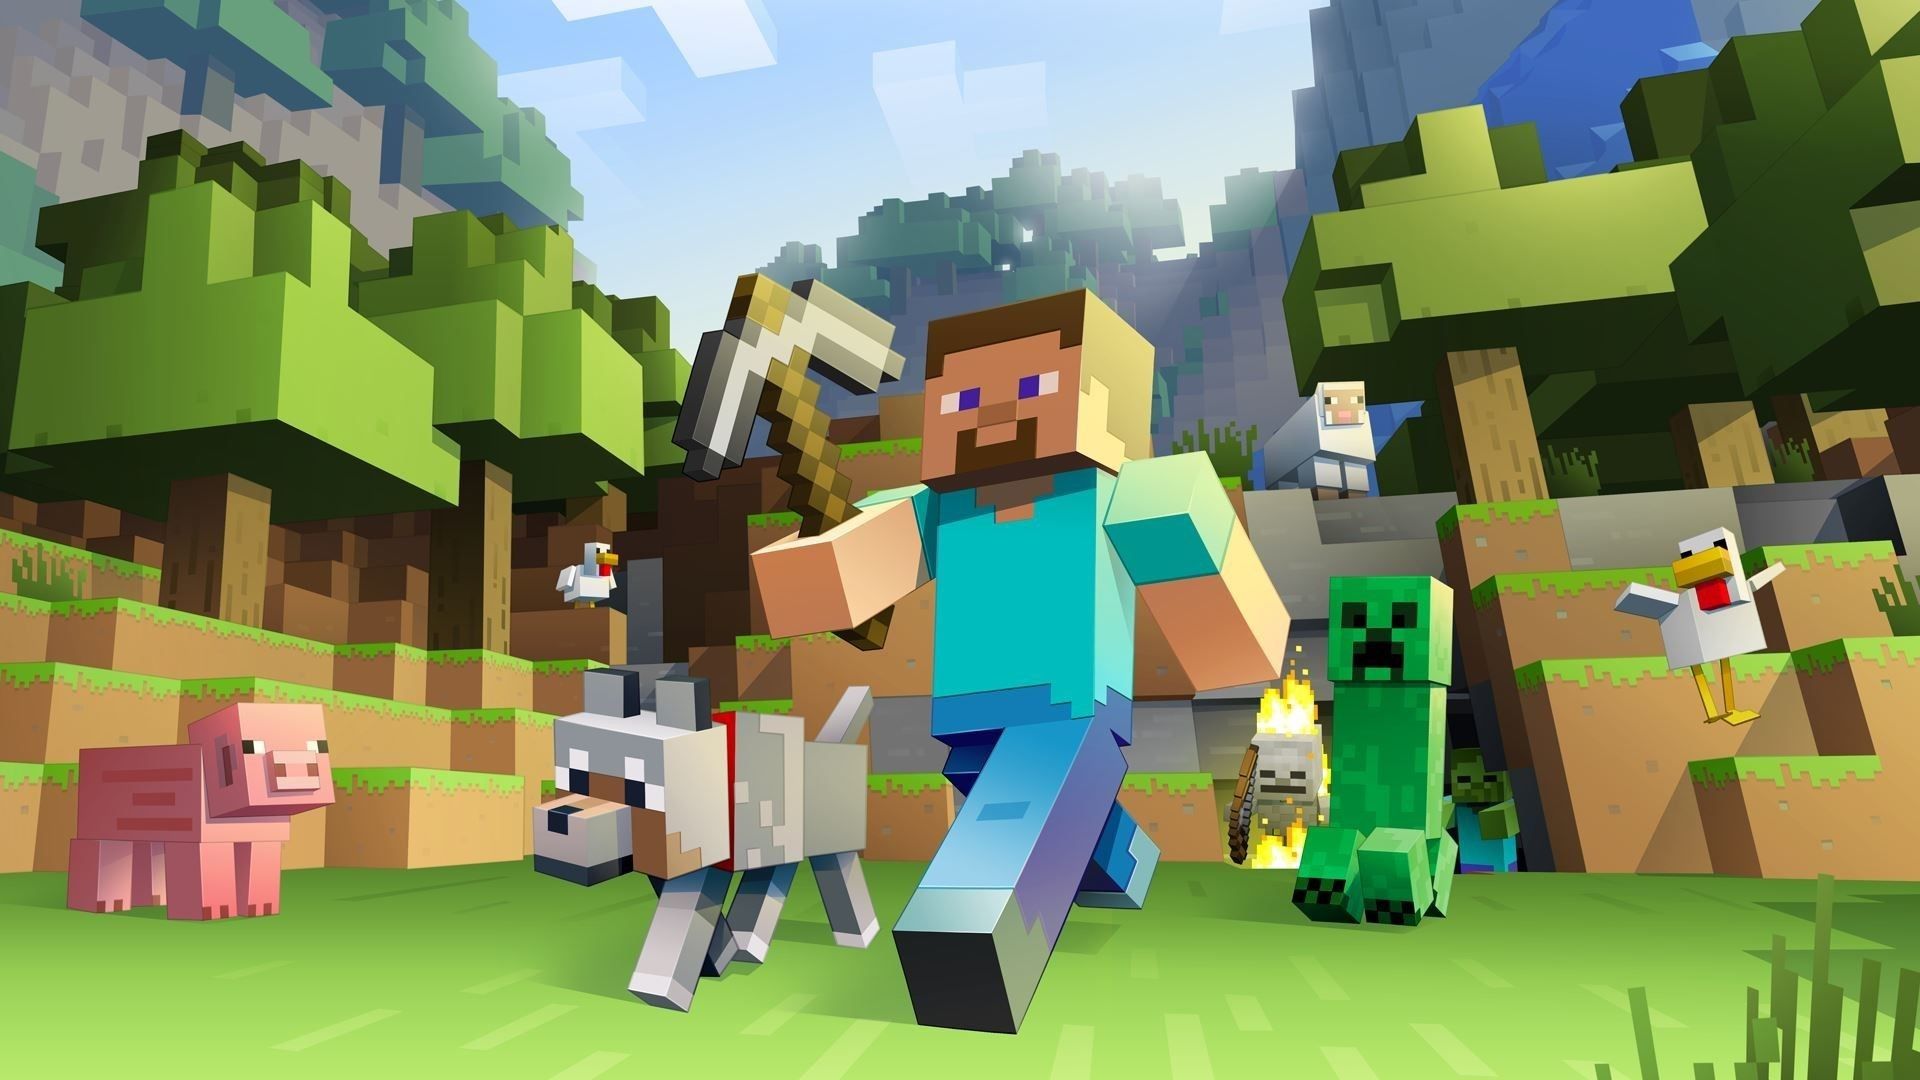 Cute Minecraft Animal Wallpapers on